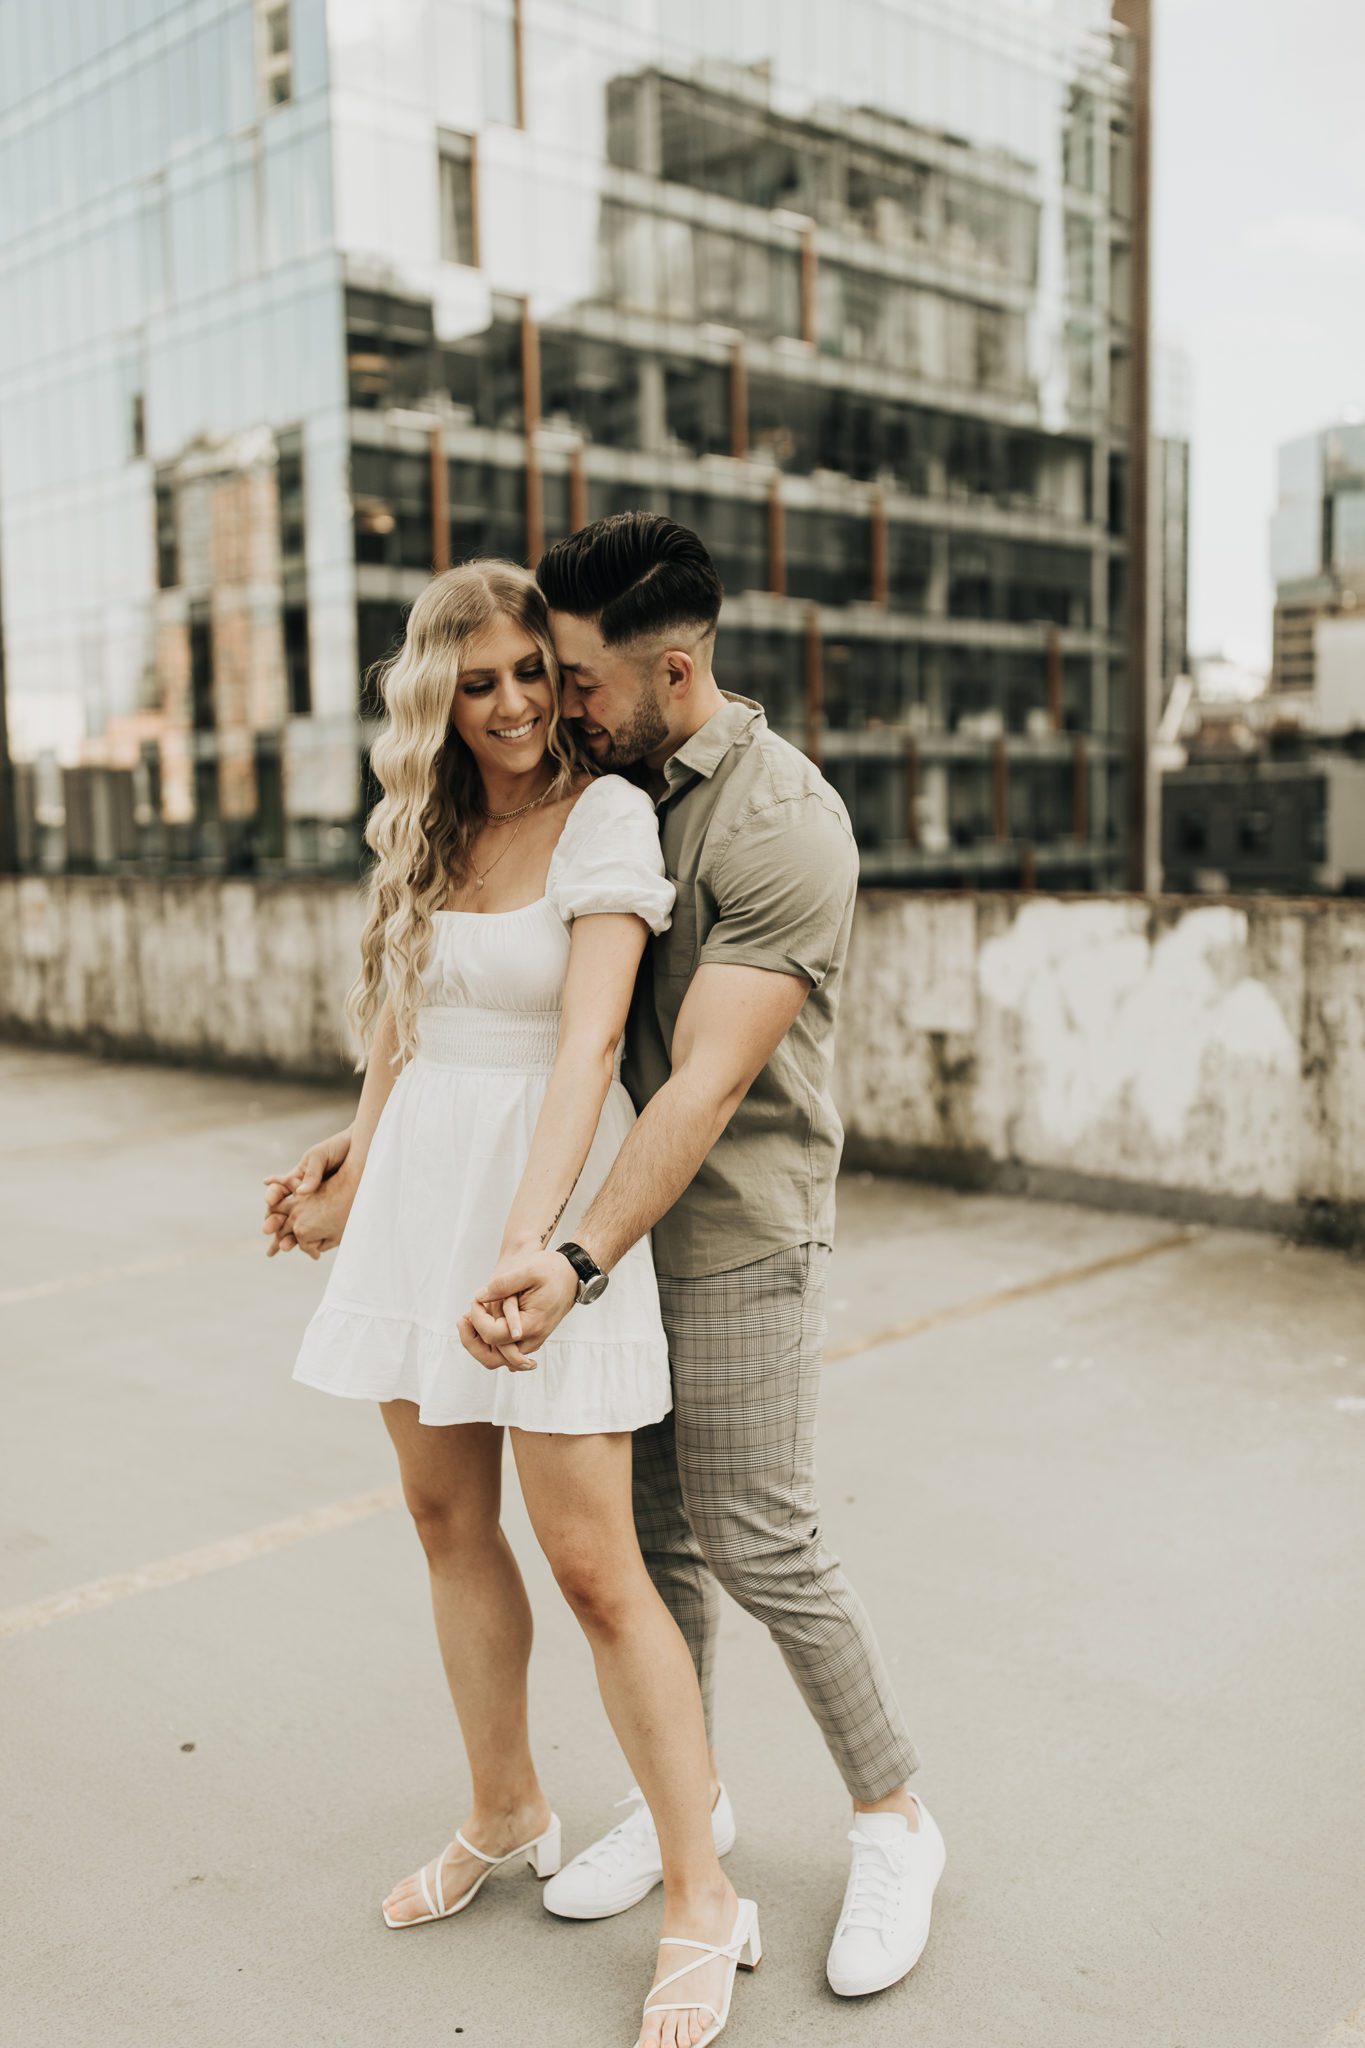 Downtown Vancouver rooftop engagement session wardrobe inspiration